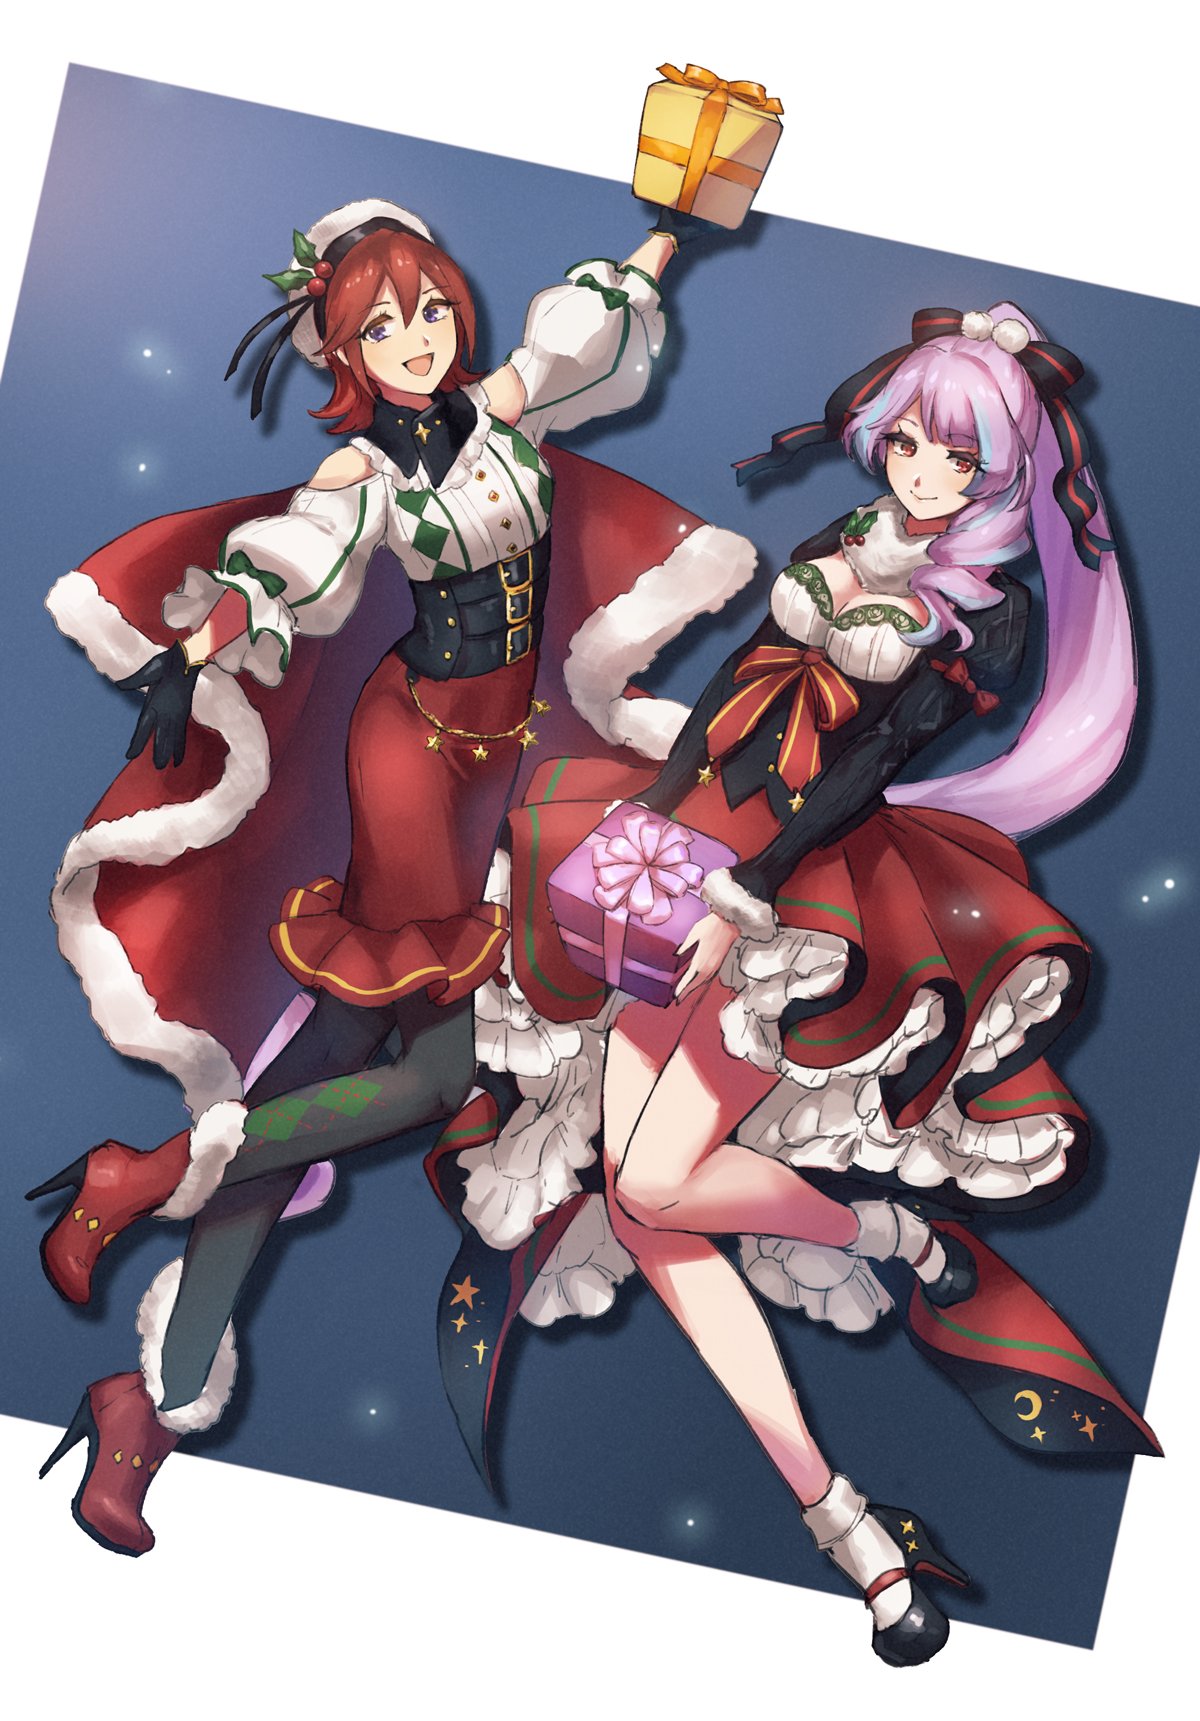 2girls :d black_gloves black_legwear blue_eyes boots box breasts choker cleavage corset eyebrows_visible_through_hair floating_hair full_body fur_boots gift gift_box gloves high_heel_boots high_heels high_ponytail highres holding holding_box kaname_buccaneer layered_skirt leg_up long_hair looking_at_viewer macross macross_delta medium_breasts mikumo_guynemer multiple_girls open_mouth outstretched_arms pantyhose pencil_skirt protected_link purple_hair red_eyes red_footwear red_skirt redhead scarf shimatani_azu shirt short_hair shoulder_cutout skirt smile socks very_long_hair white_hair white_legwear white_shirt